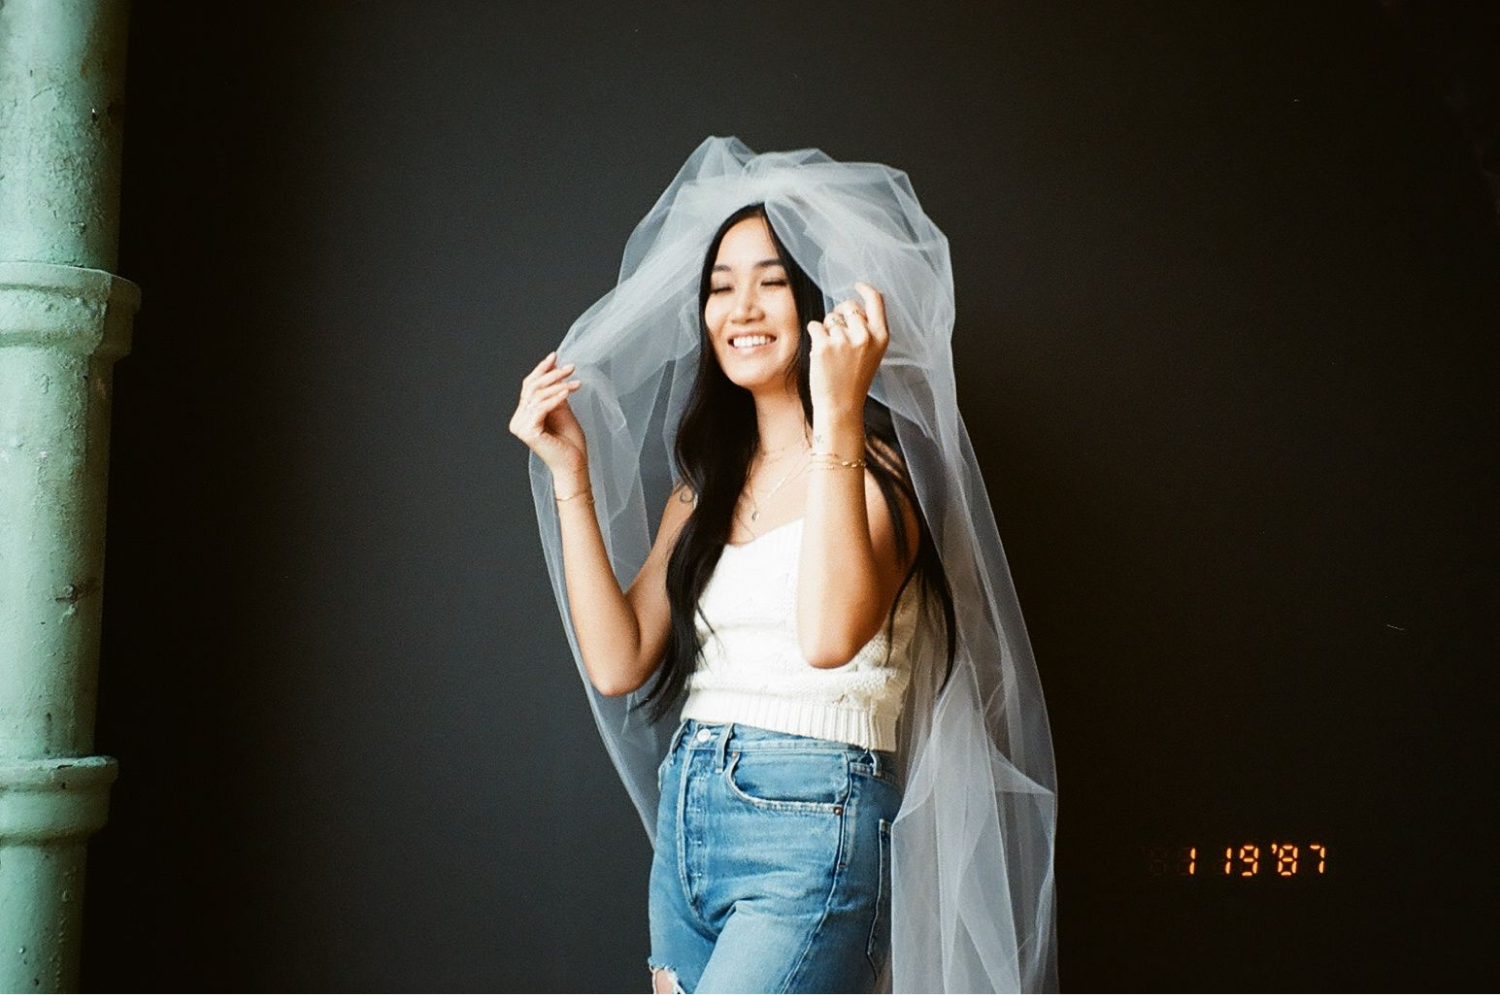 A girl standing in front of a black wall wearing a veil, a  white tank and jeans laughing. Shot on 35mm film.